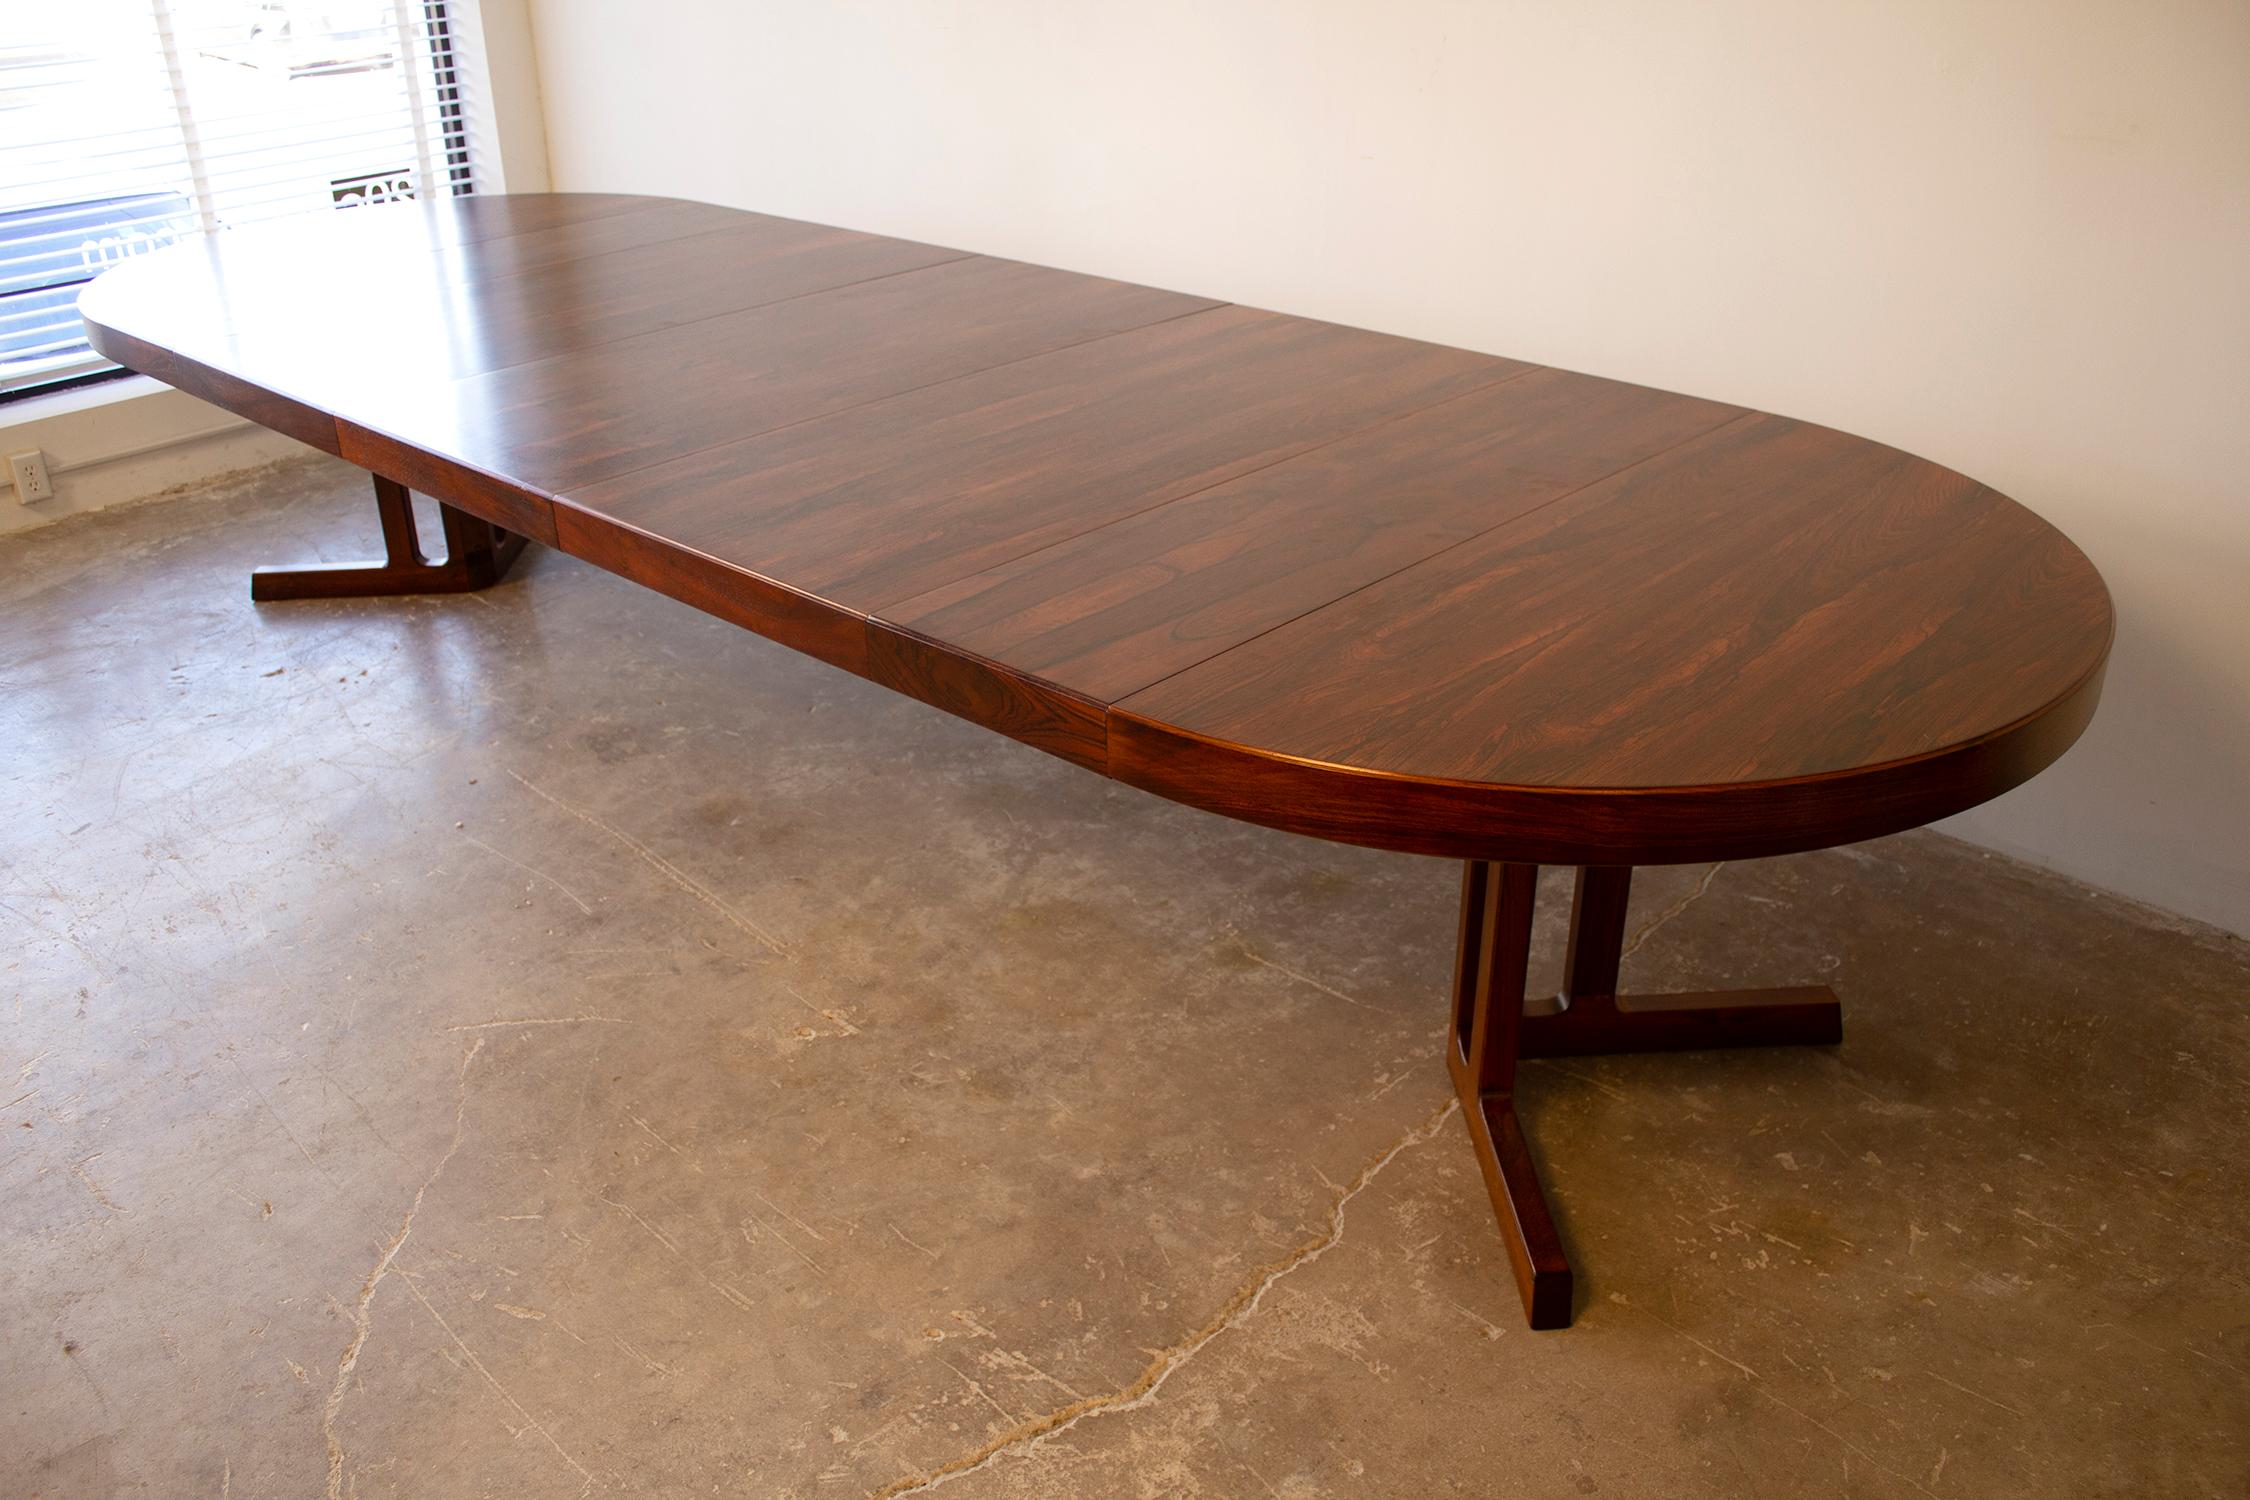 Massive Johannes Andersen Danish modern rosewood dining table fabricated in the 1960s. This table functions as a circular breakfast table but opens up to accept up to 5 leaves creating a massive banquet table that originally accommodated 14 highback